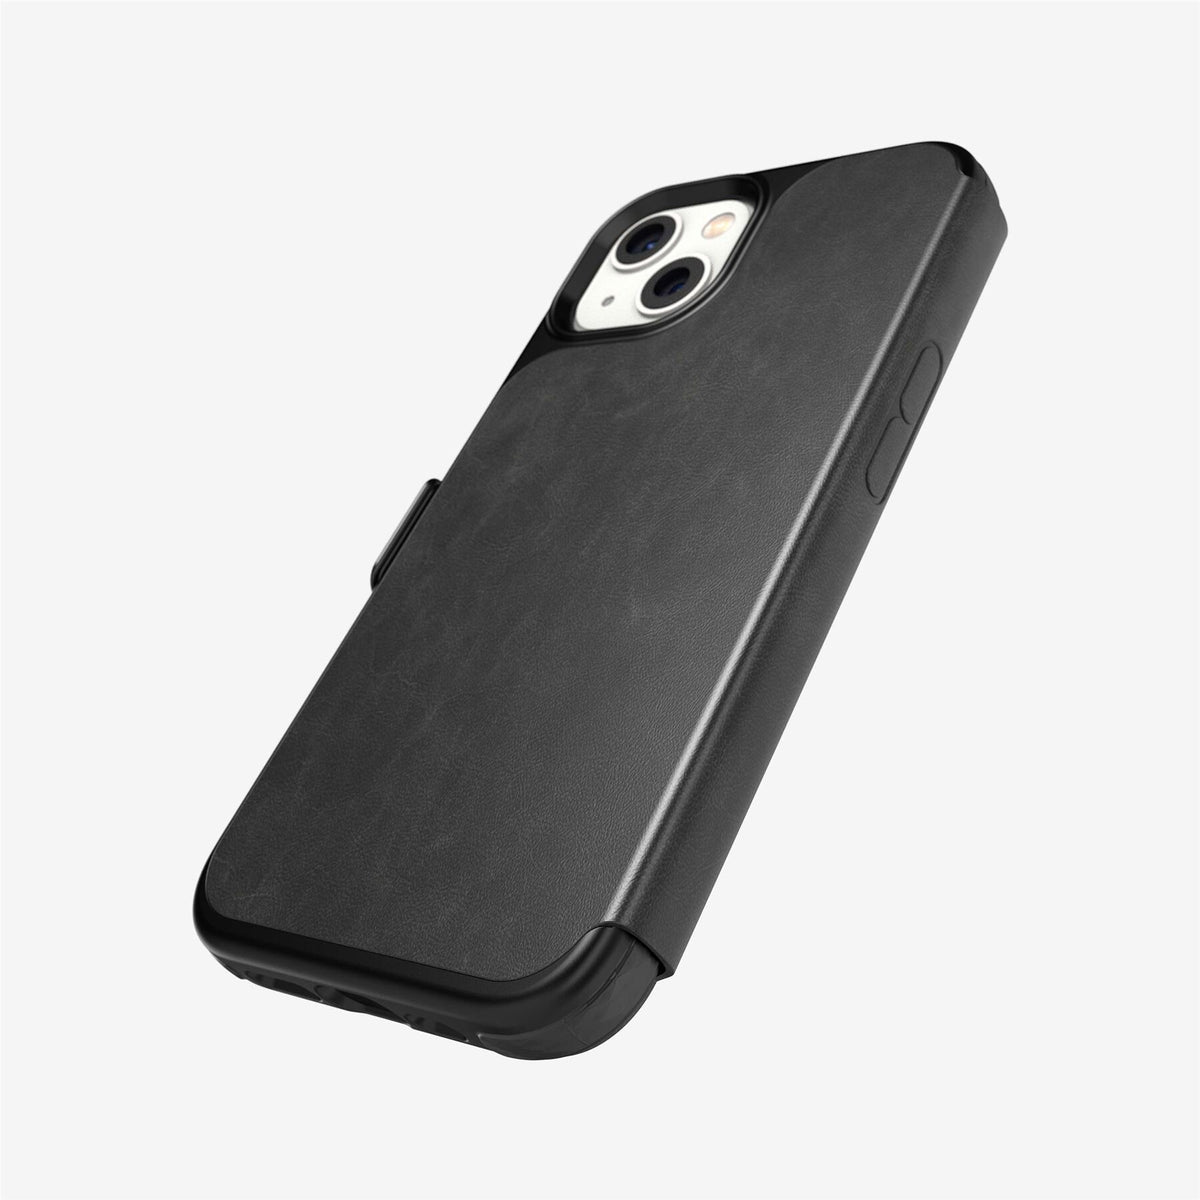 Tech21 Evo Wallet Case for iPhone 13 in Black